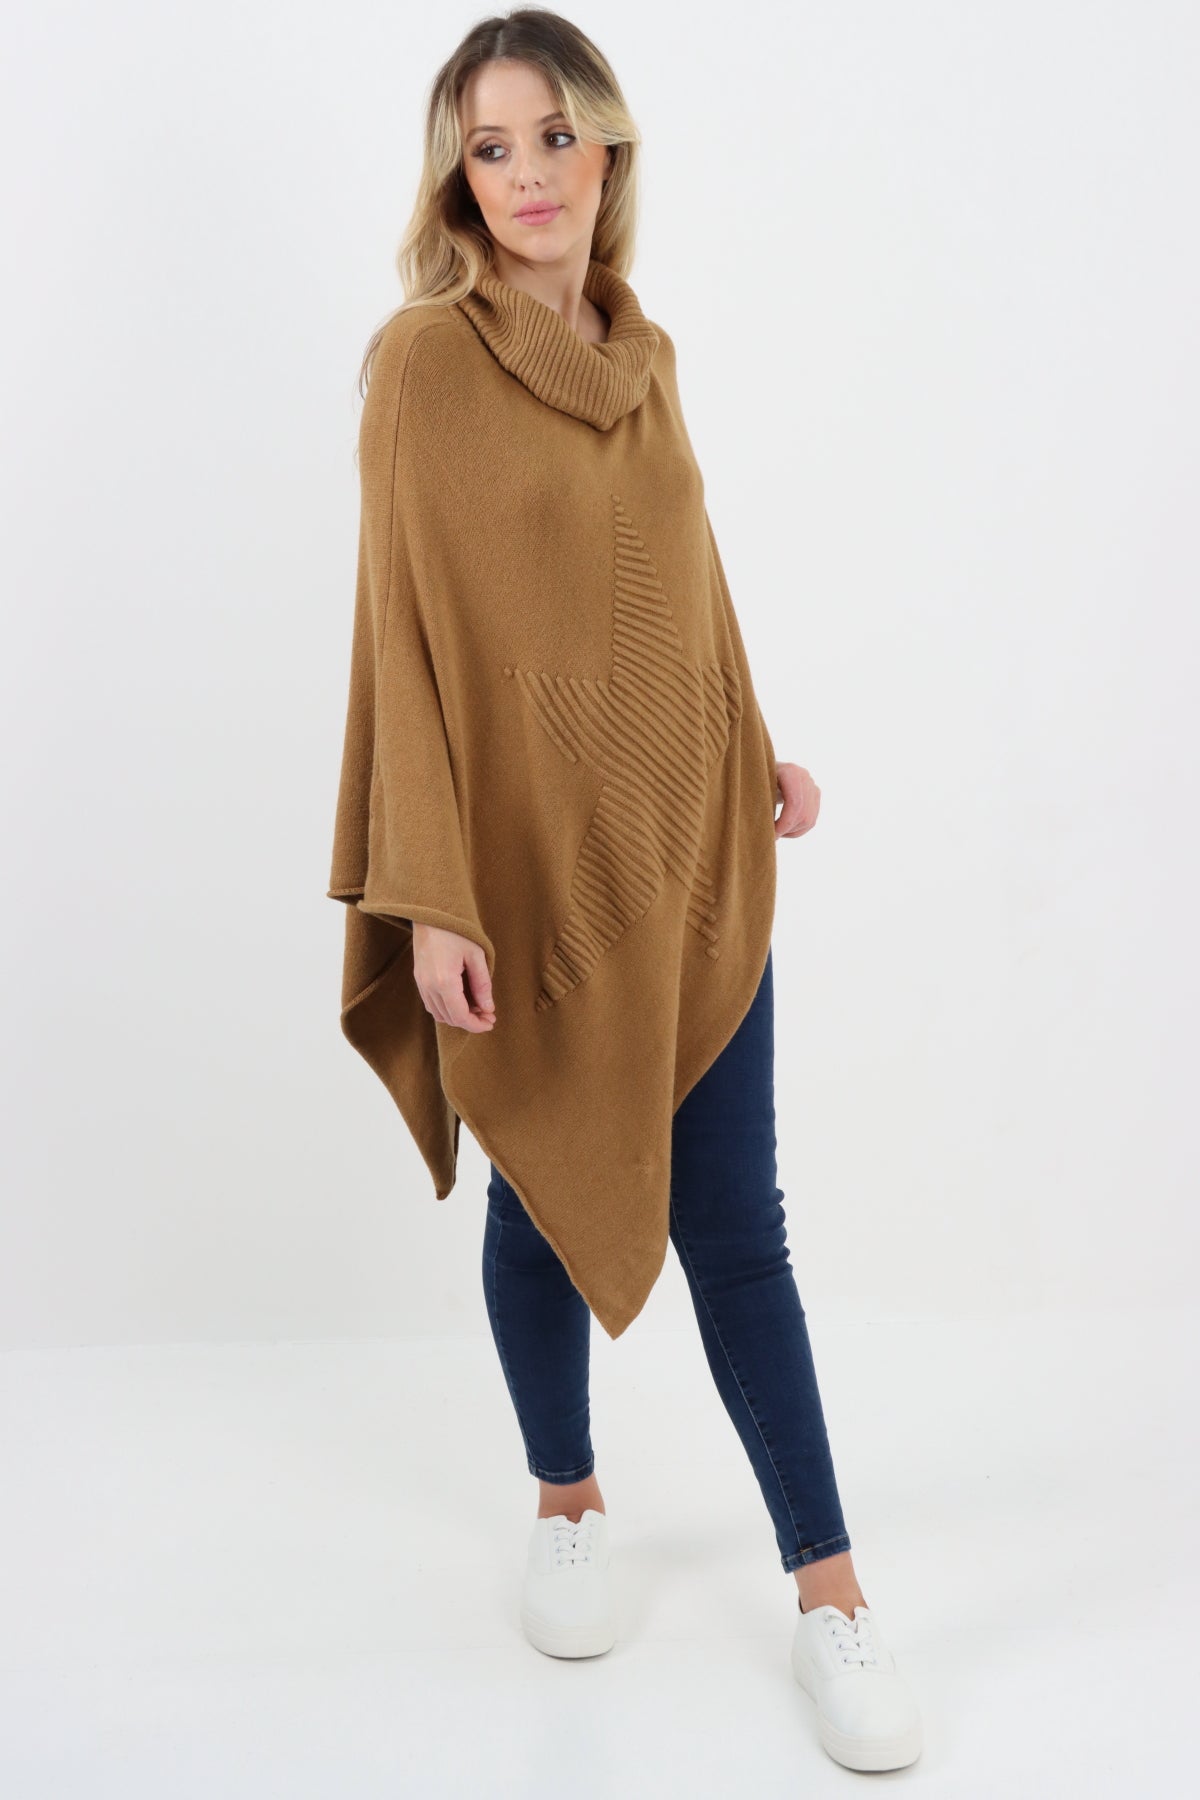 Italian Knitted Star Cowl Neck Lagenlook Poncho